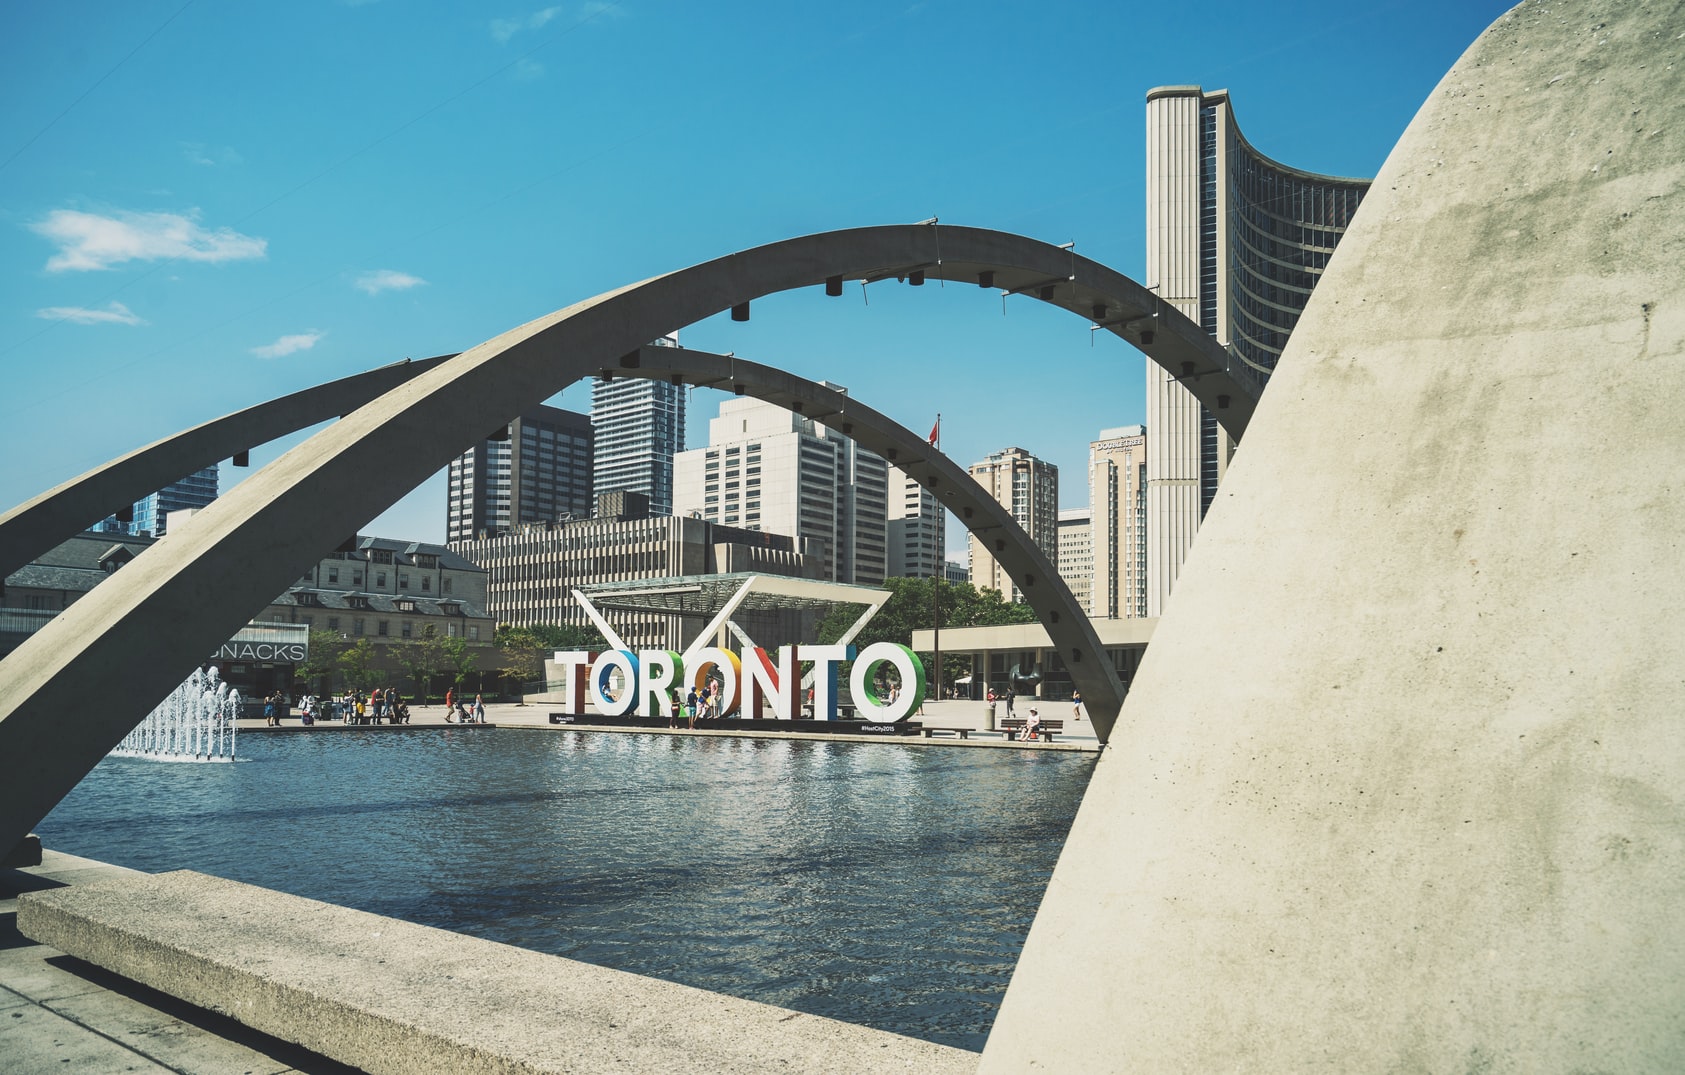 OpenUnit was founded in Toronto, Canada